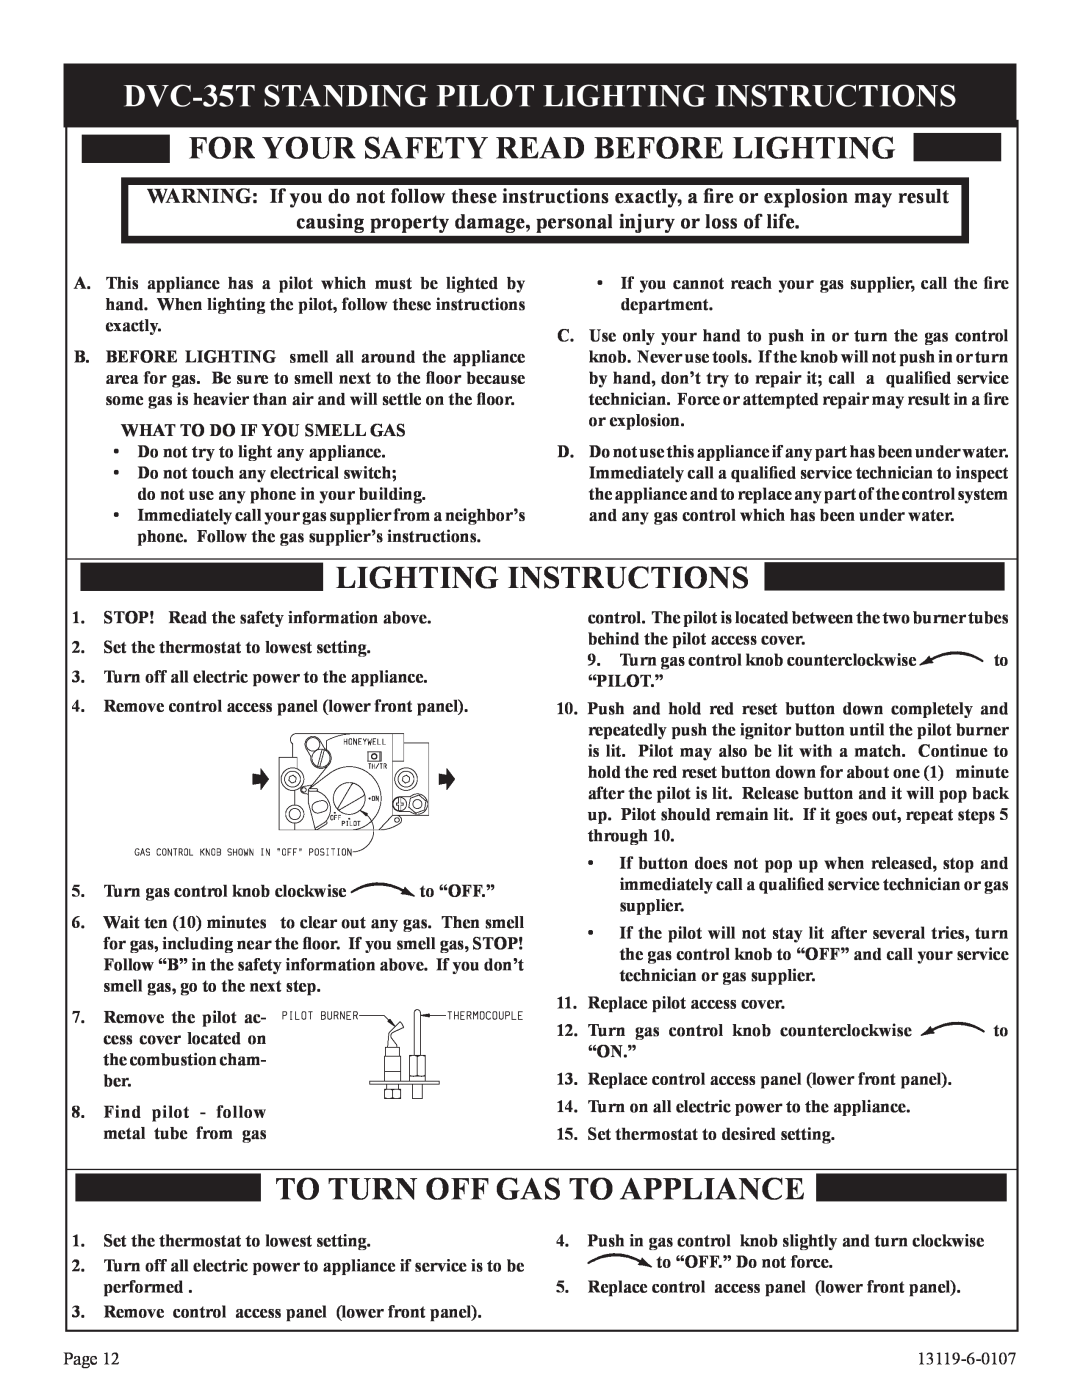 Empire Products DVC-35IPT-1, DVC-35T-1 DVC-35TSTANDING PILOT LIGHTING INSTRUCTIONS, For Your Safety Read Before Lighting 